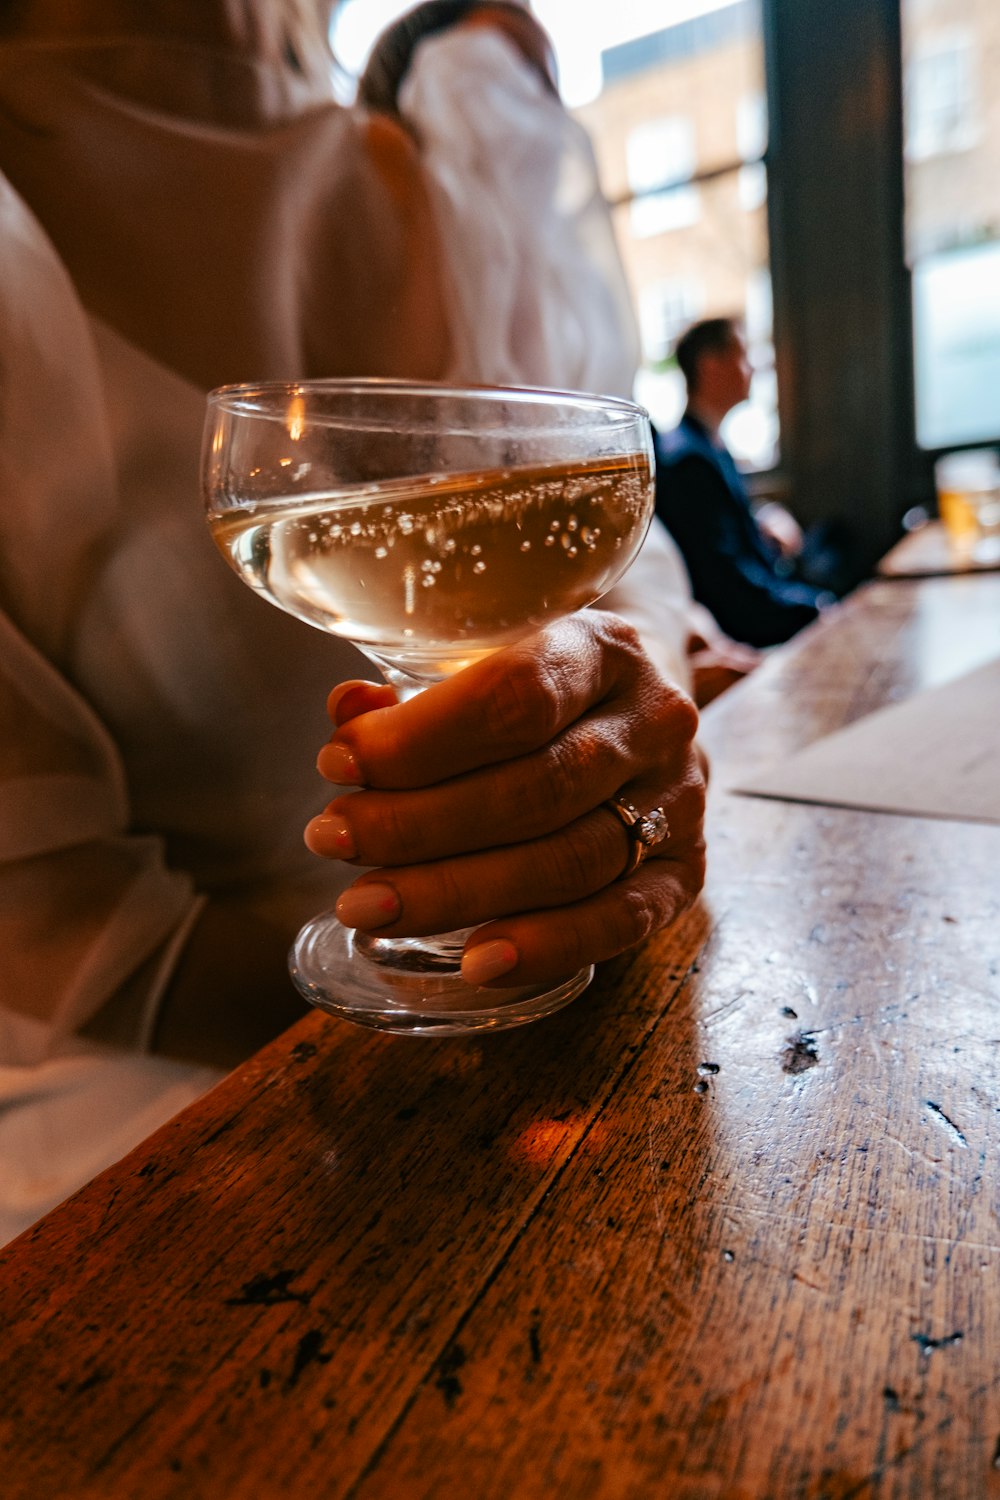 a person holding a glass of wine on a table